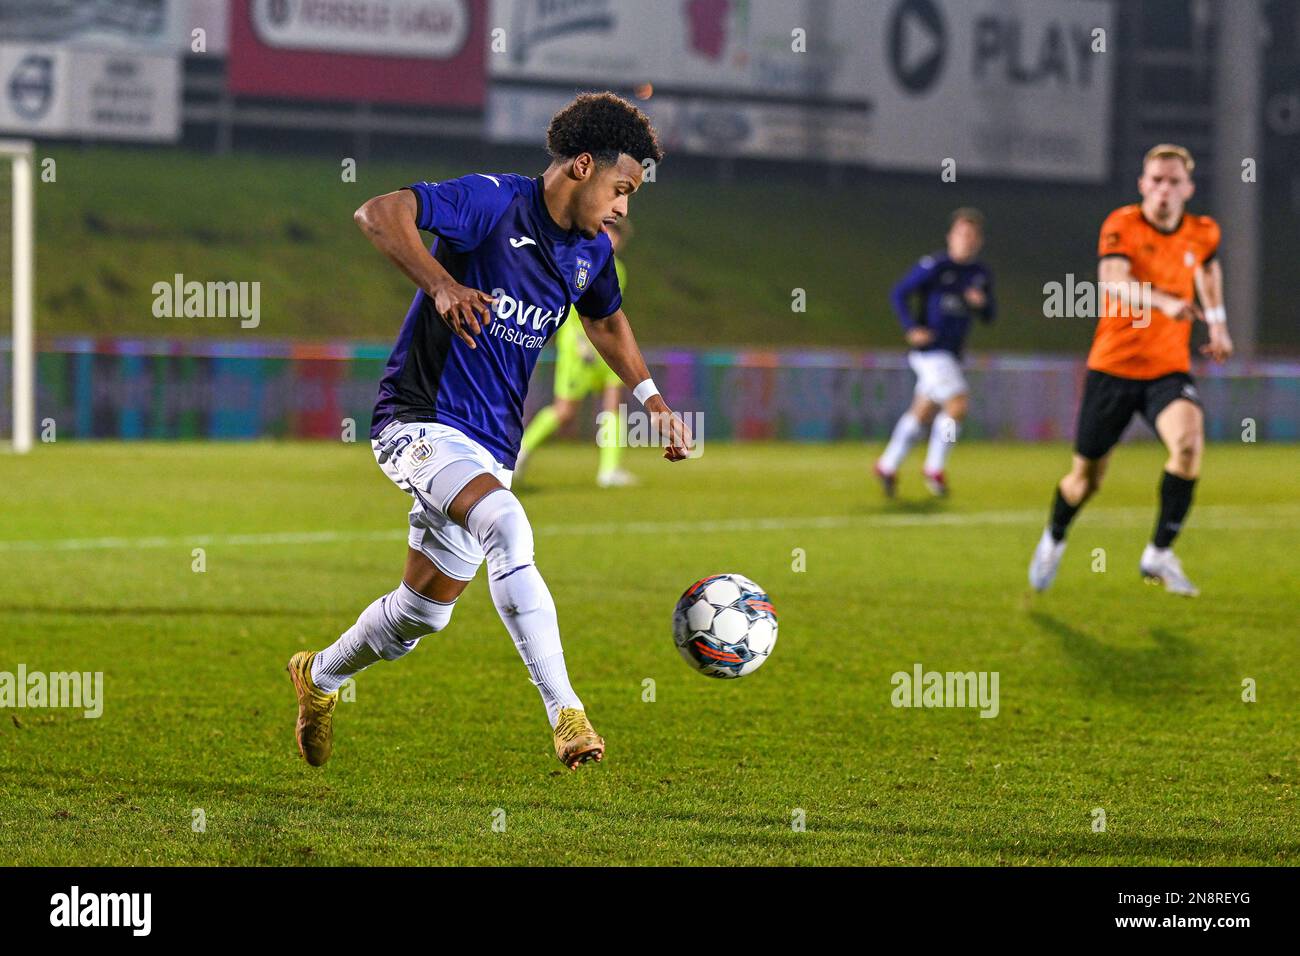 Ilay Camara (57) of RSC Anderlecht pictured during a soccer game between  KMSK Deinze and RSC